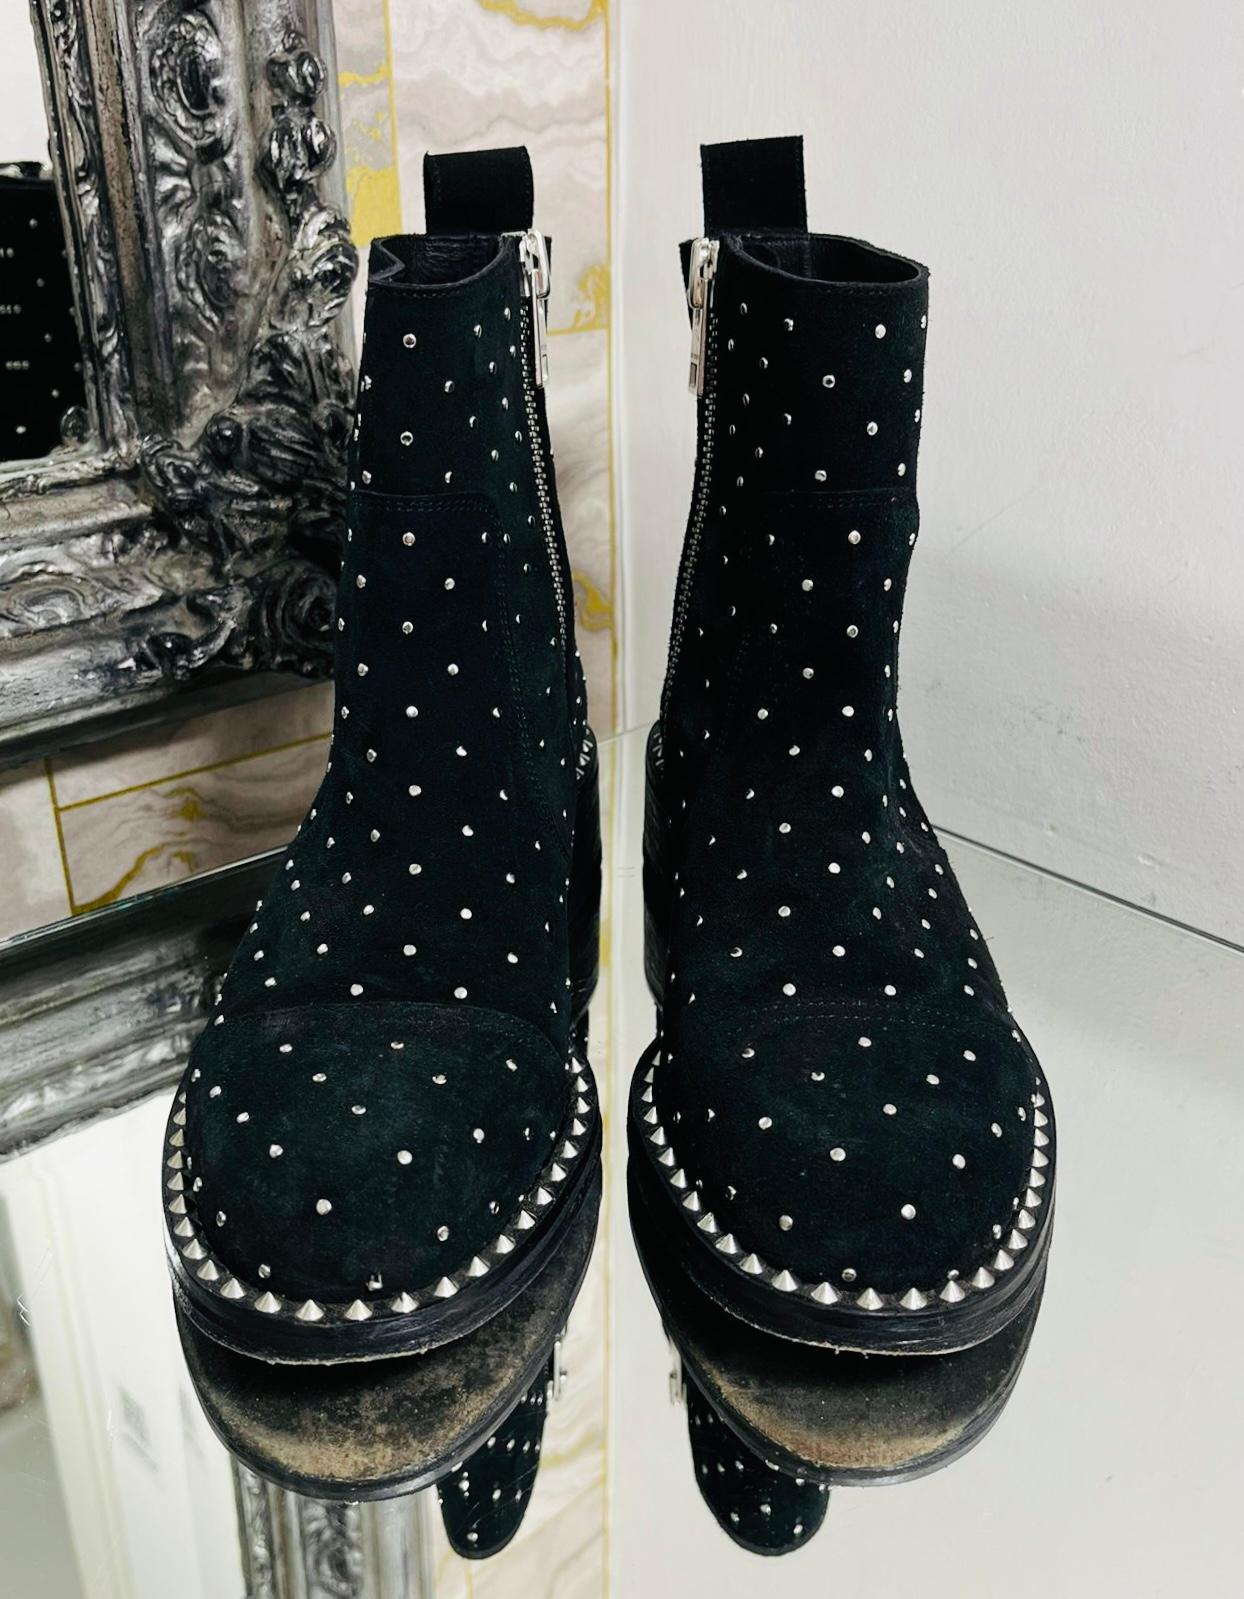 Zadig & Voltaire Empress Studded Suede Ankle Boots

Black boots designed with silver studs embellishment throughout.

Detailed with zip fastening to the side and round toe.

Featuring short block heel and leather soles. Rrp £580

Size –